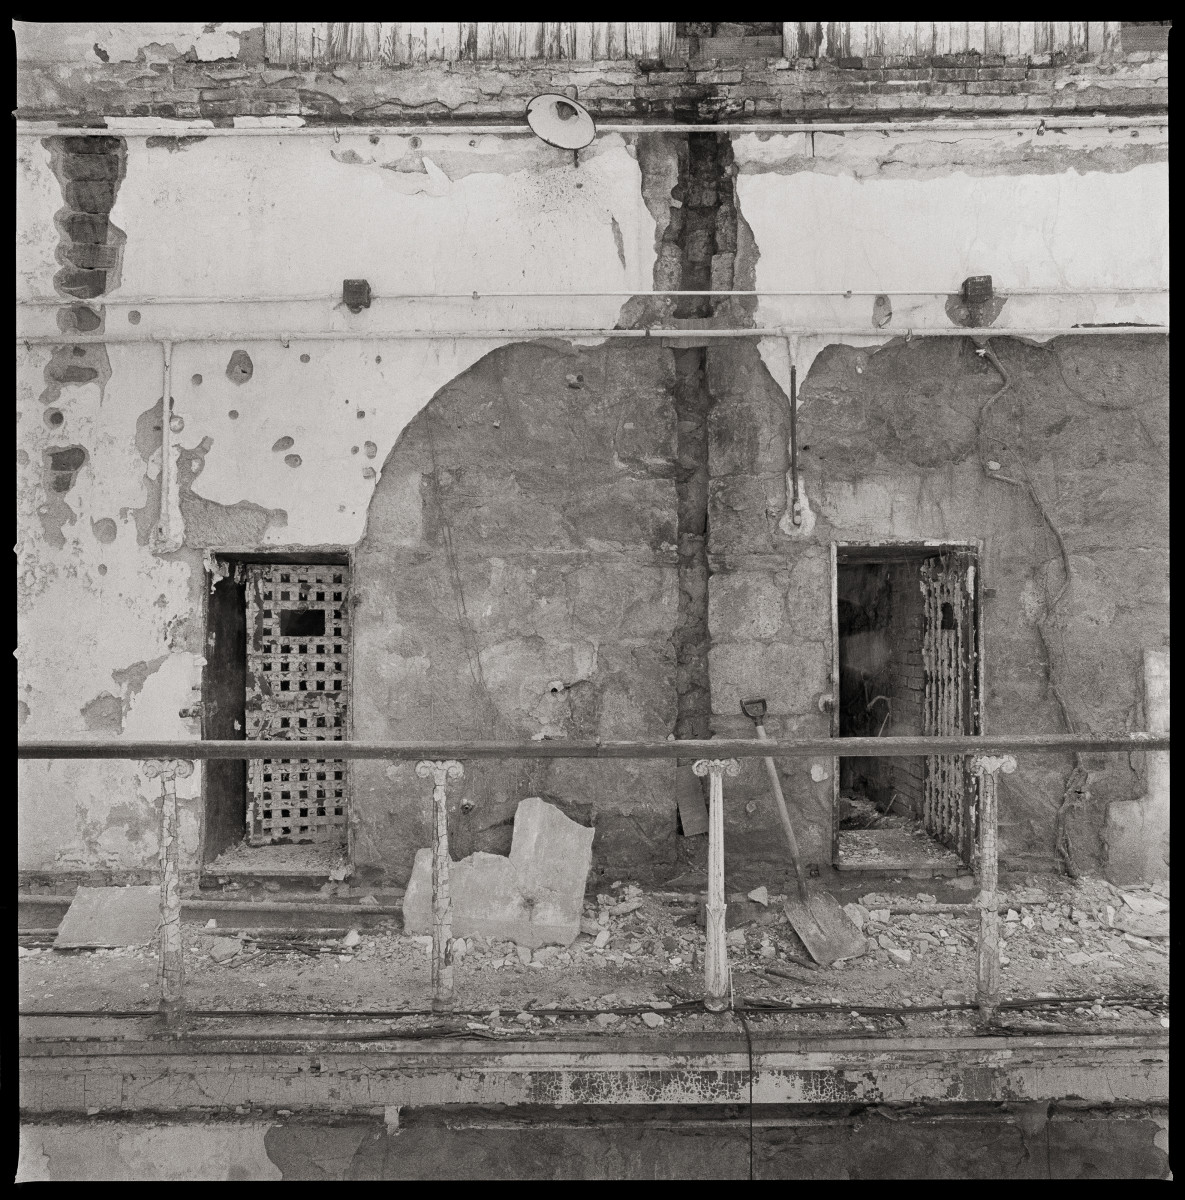 Untitled by Eric T. Kunsman  Image: ID: A black and white image shows two cells side by side from across the partition. There is a bar in front of the hall.  The door on the left is closed; the one on the right is open.  Around the doors is a wall of cracking cement.